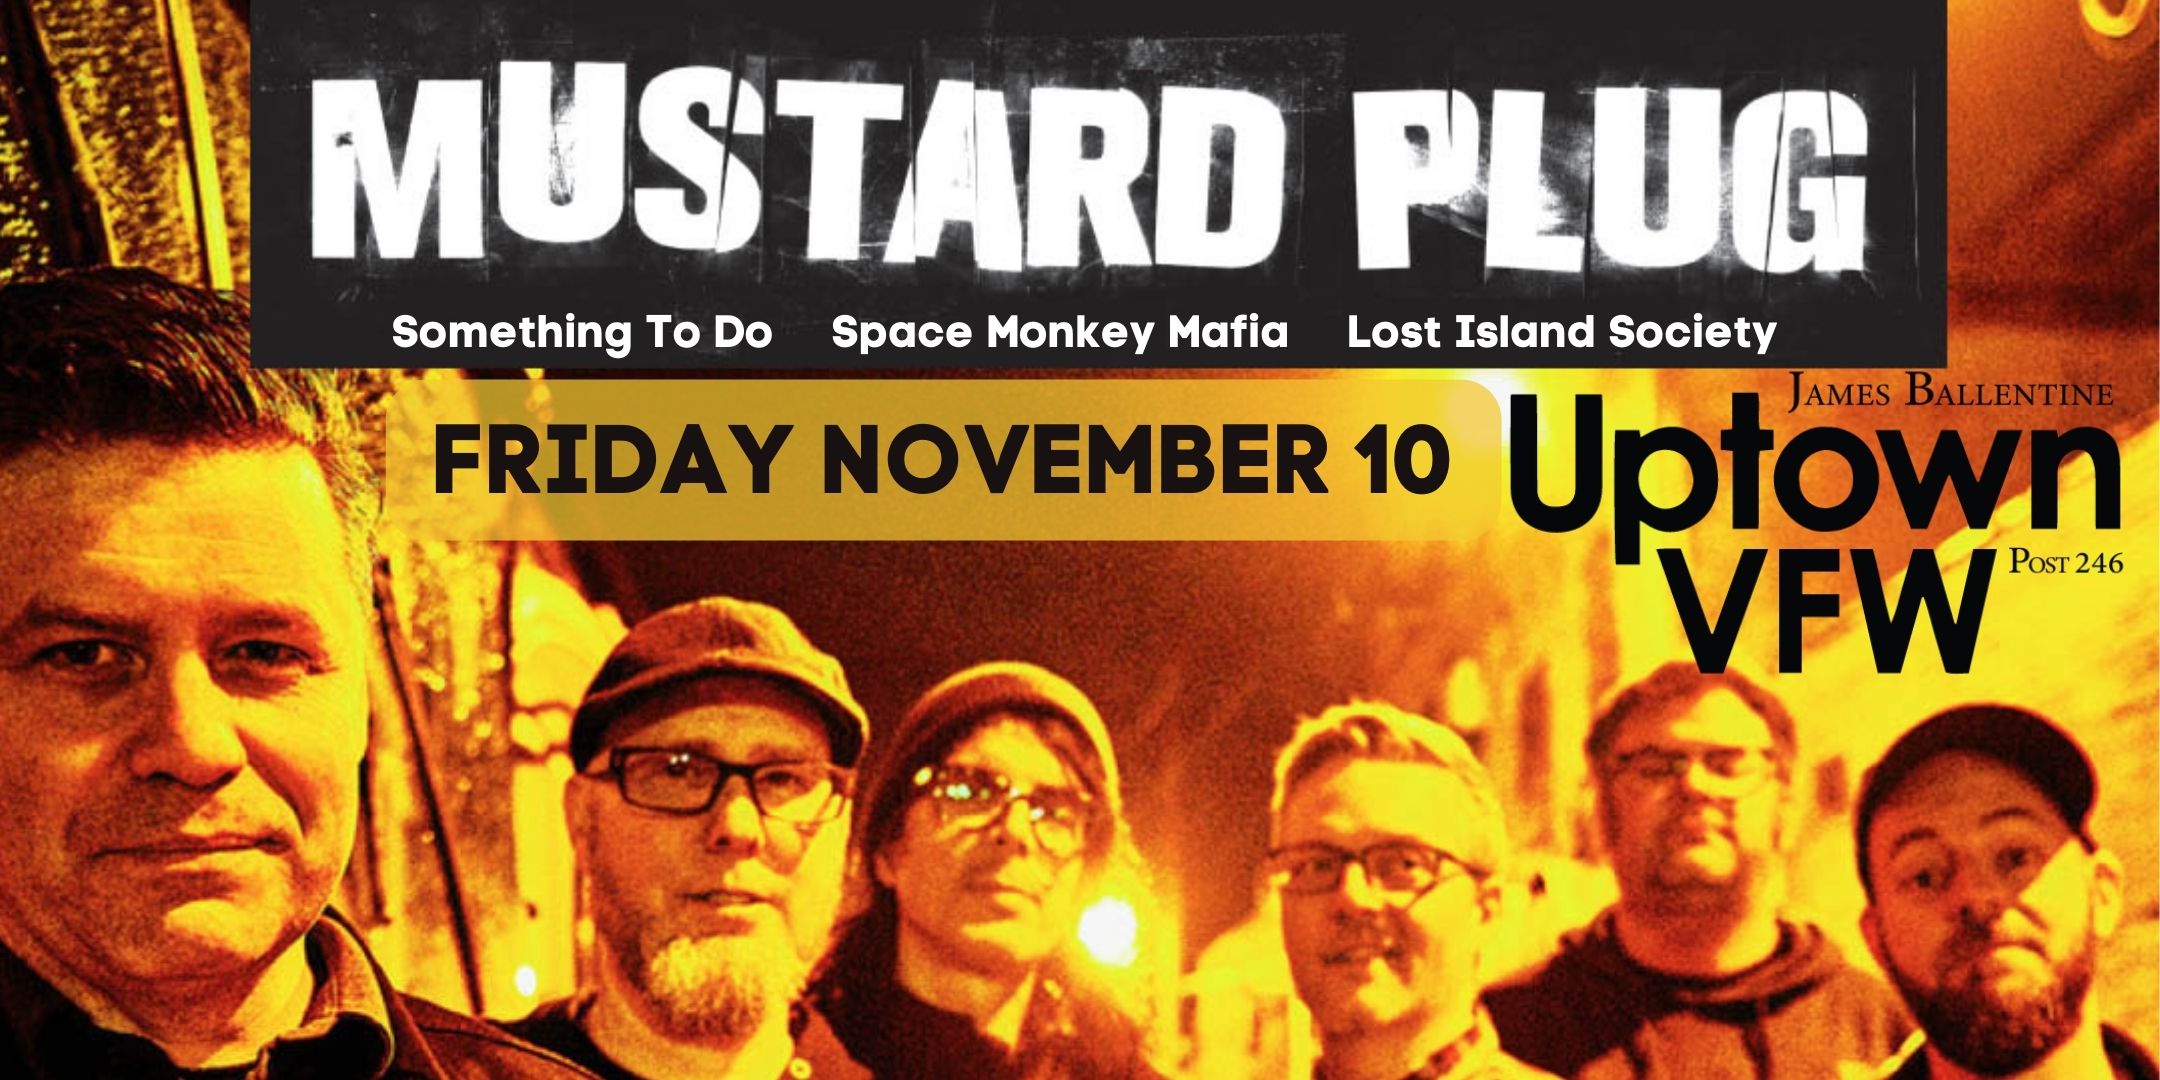 Mustard Plug w/ Something To Do, Space Monkey Mafia, Lost Island Society Friday November 10 James Ballentine "Uptown" VFW Post 246 Doors 7:00 :: Music 7:30 :: 21+ $20 Advance / $25 Day of Show NO REFUNDS